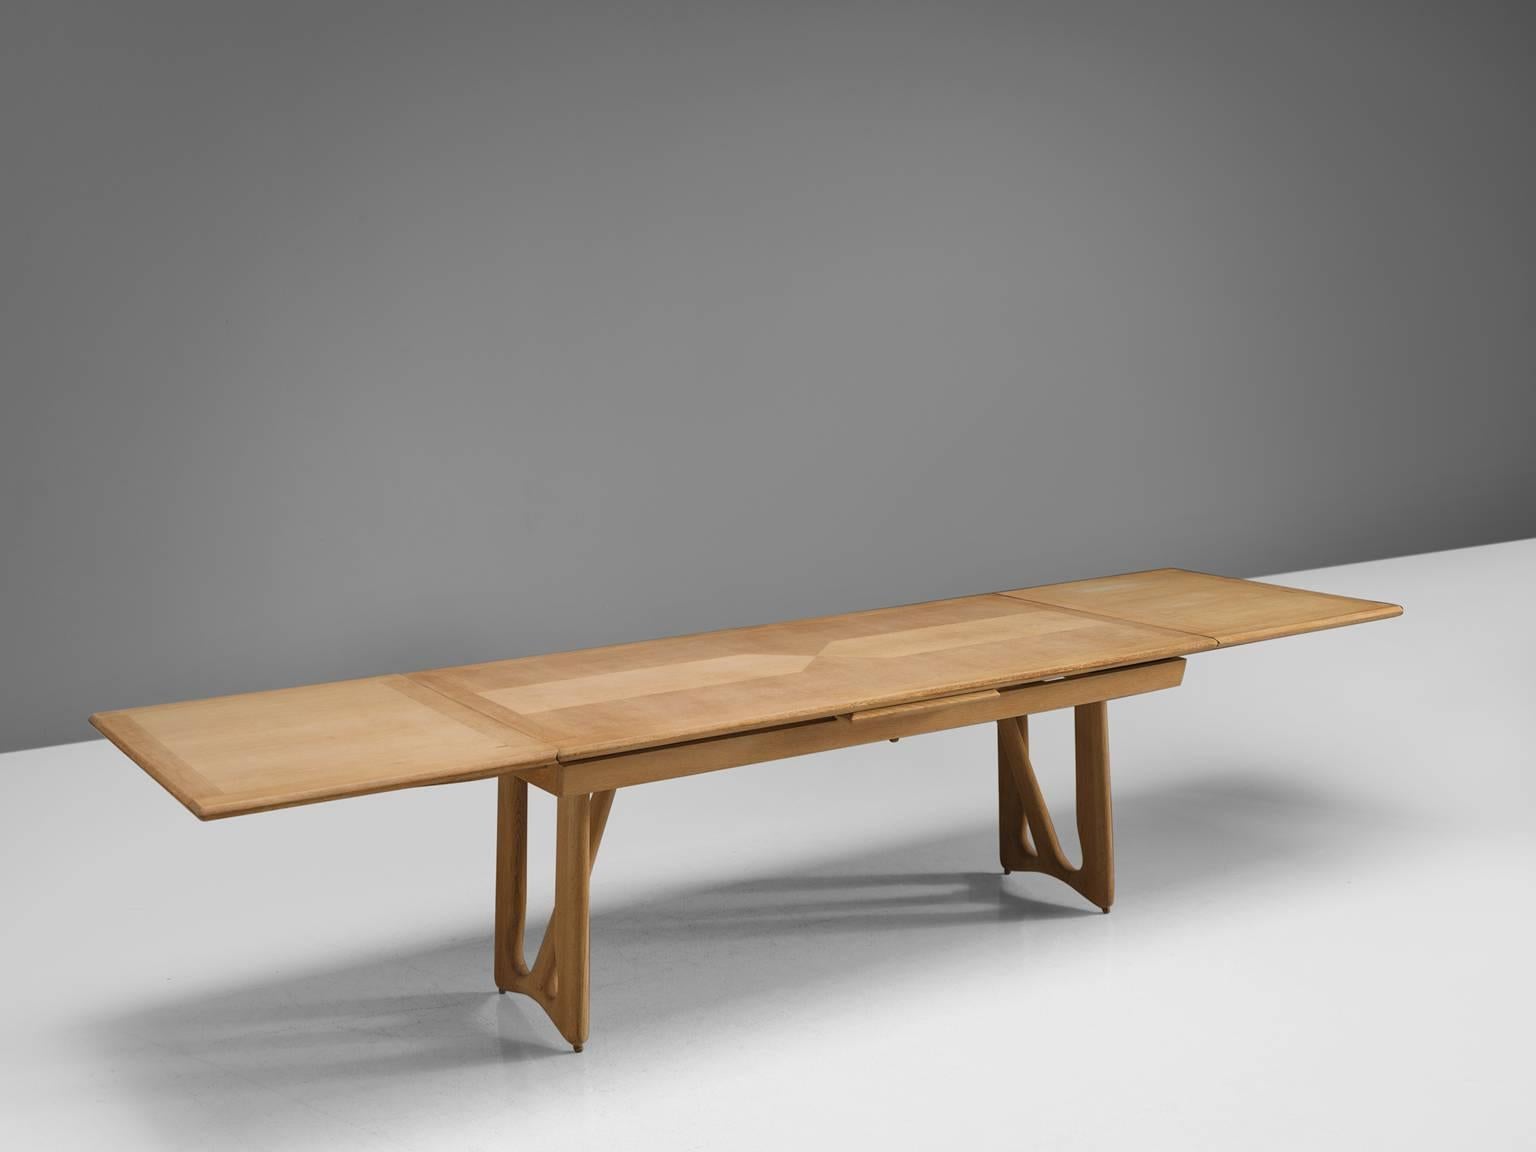 Guillerme et Chambron for Votre Maison, dining table, oak, France, 1965.

This oak 3.20 mt/ 10.5 ft extendable dining table by French designer duo Jacques Chambron. The legs of this table are beautifully shaped and show nice organic forms. The top